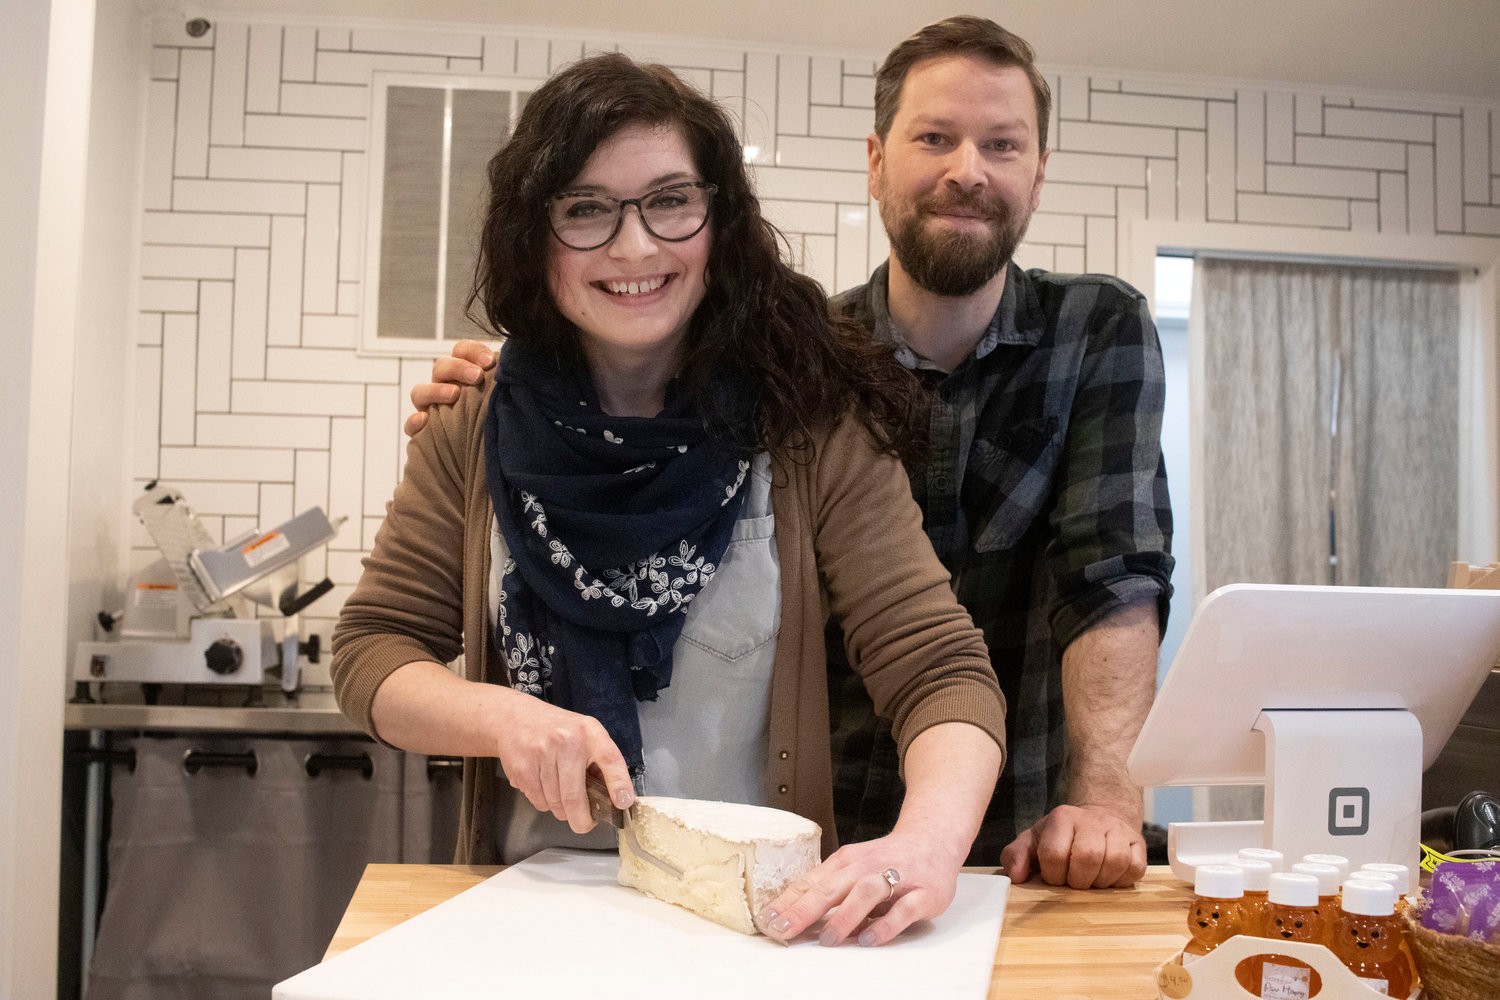 Rind owners Ashley LaPlante and Tim Fichera worked together in restaurants for more than 20 years and recently opened a new cheese shop in Barrington.